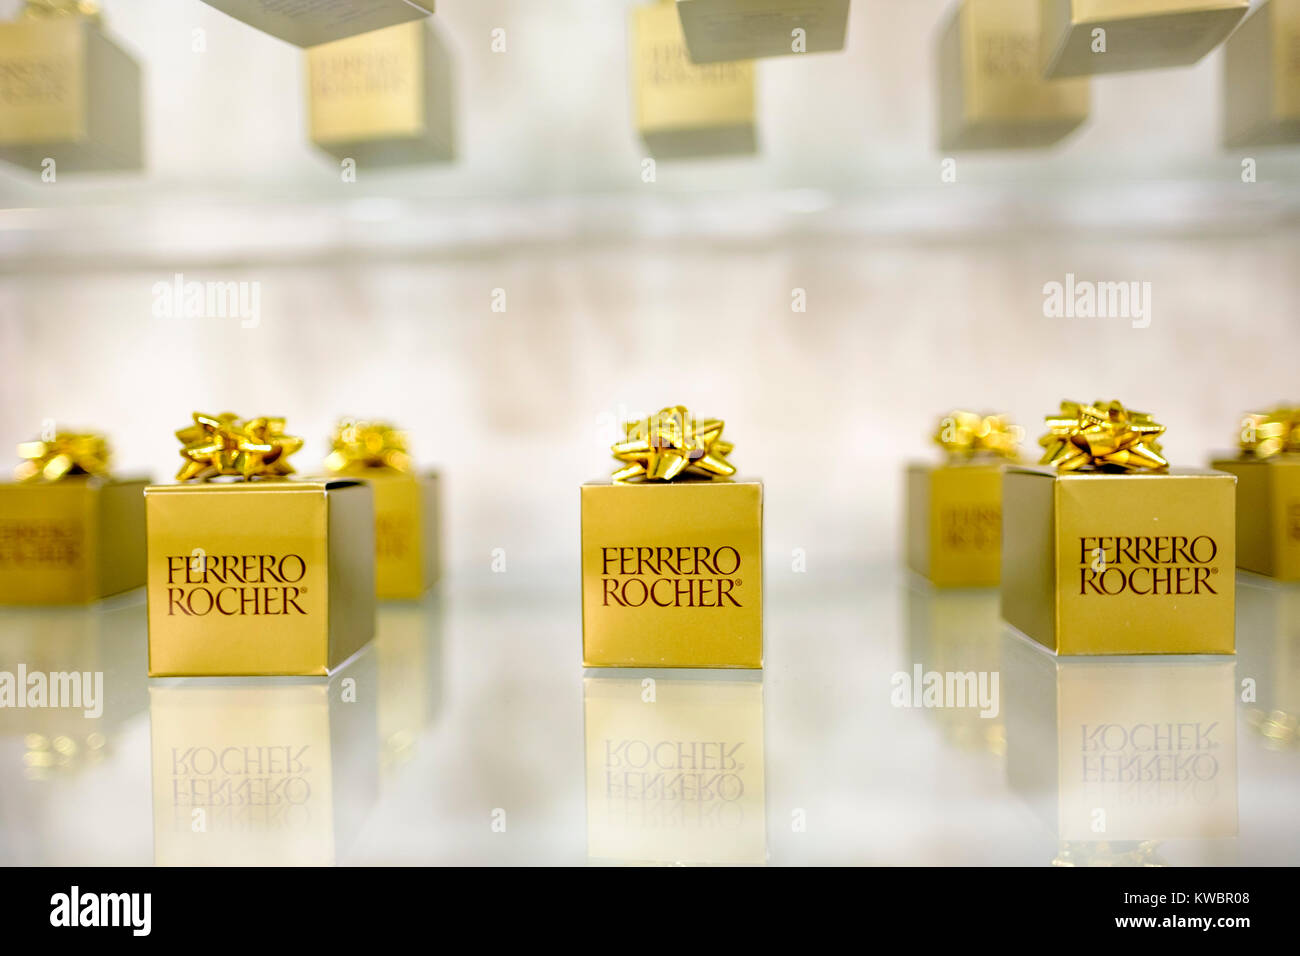 Store shelf displaying gift wrapped boxes of Ferrero Rocher chocolate during Christmas season at Yorkdale Shopping Centre, Toronto, Ontario, Canada. Stock Photo